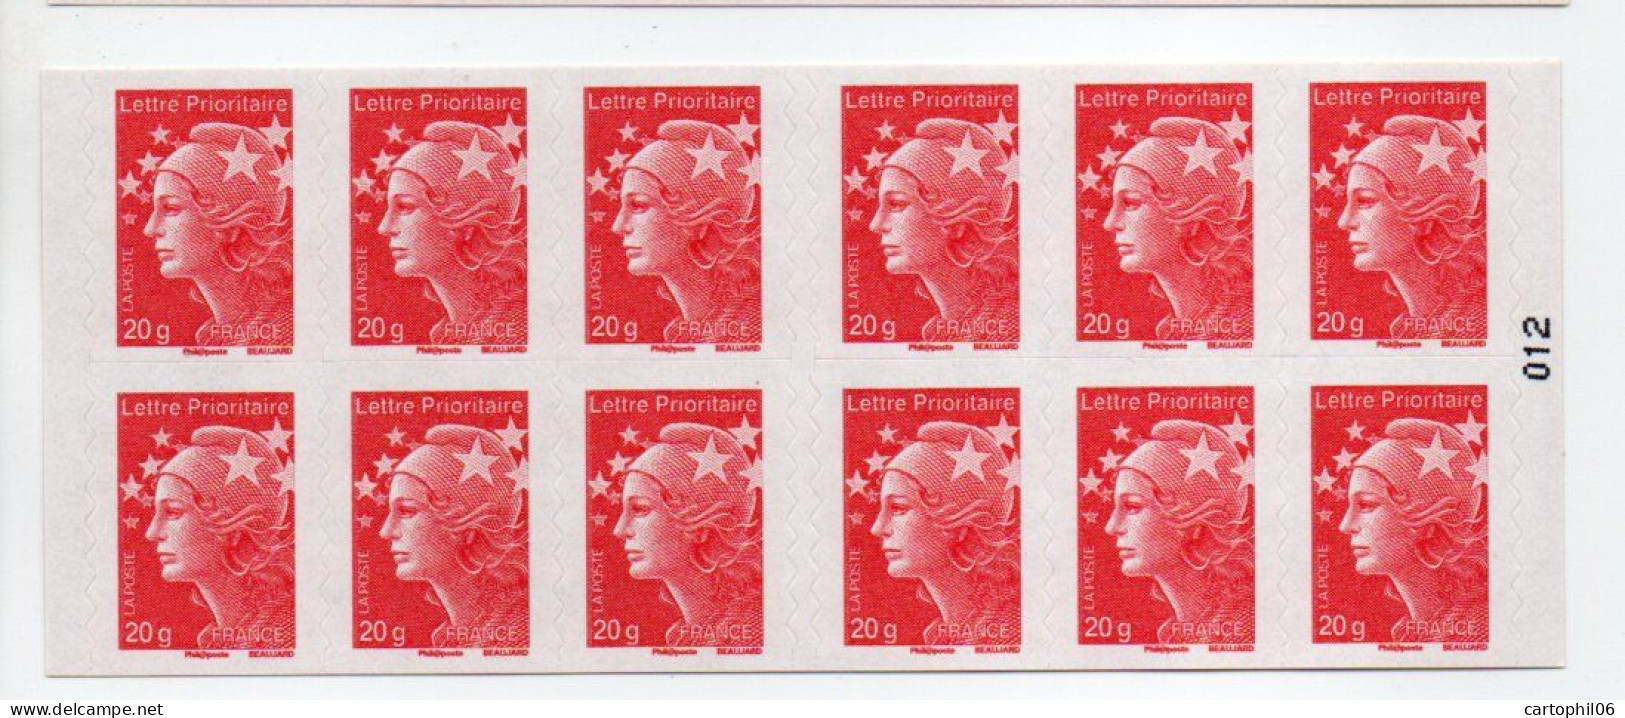 - FRANCE Carnet 12 Timbres Prioritaires Marianne De Beaujard - MON TIMBRAMOI - VALEUR FACIALE 17,16 € - - Moderne : 1959-...